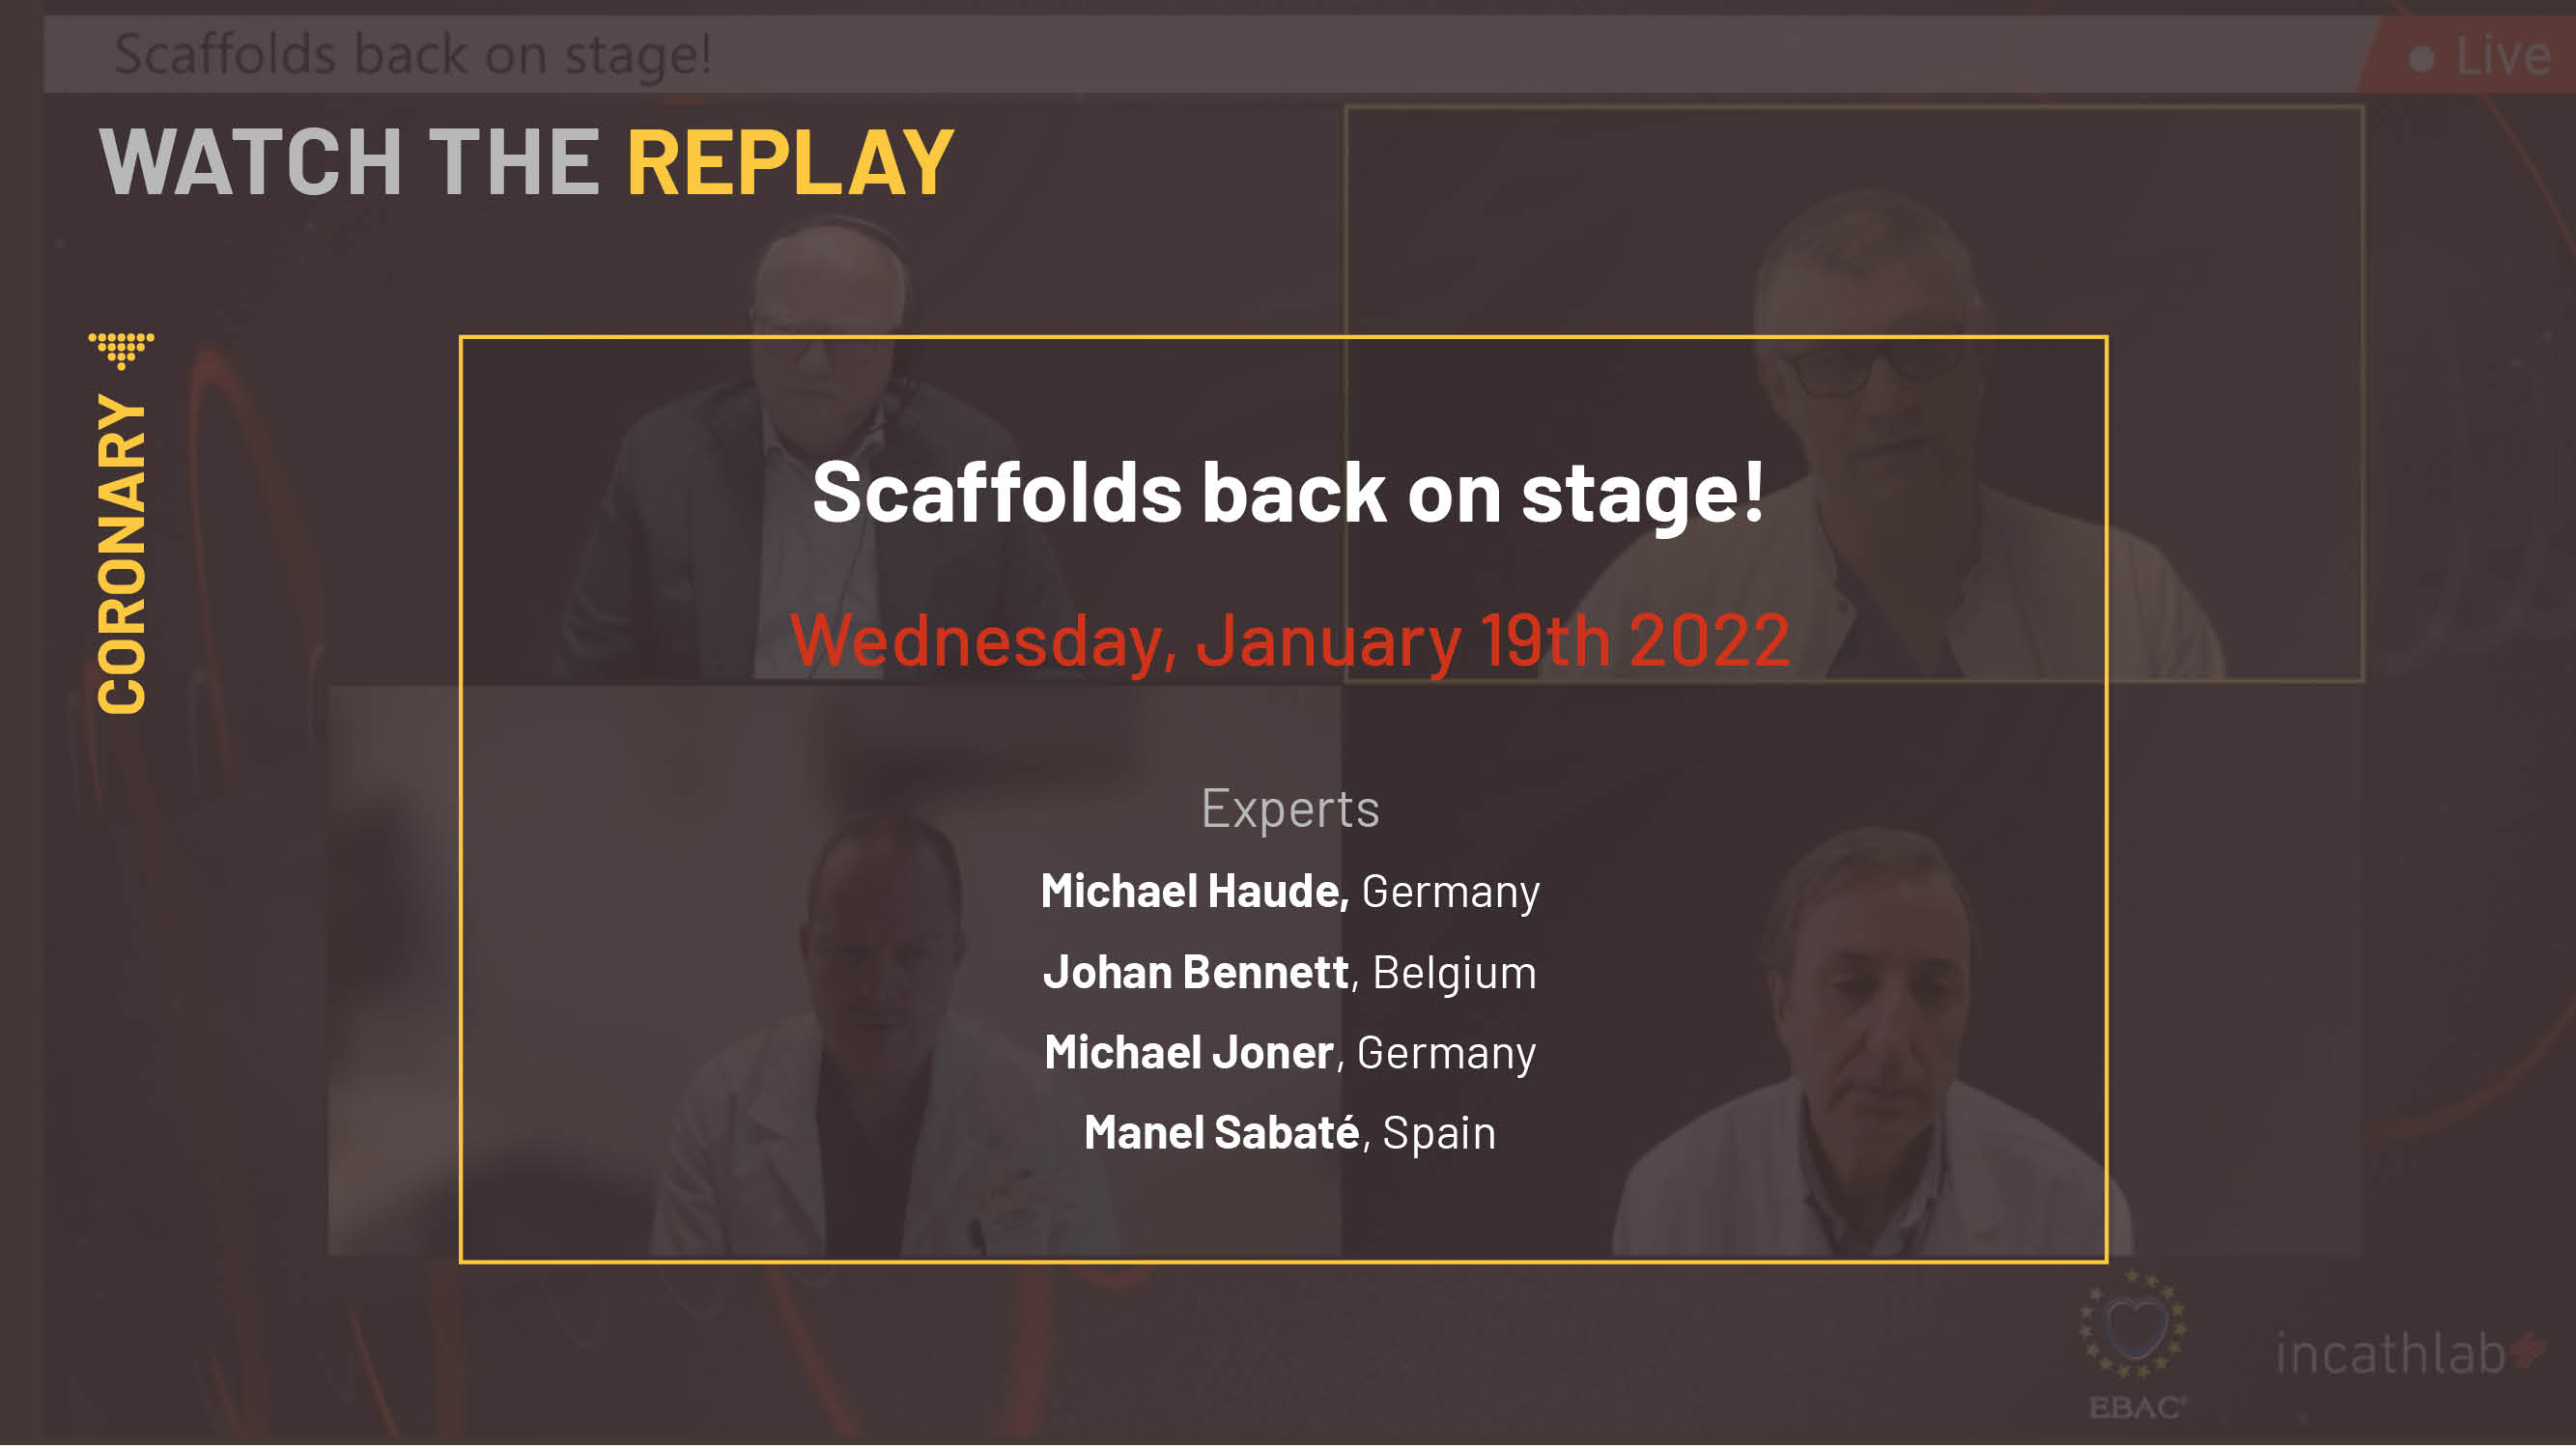 Scaffolds back on stage!